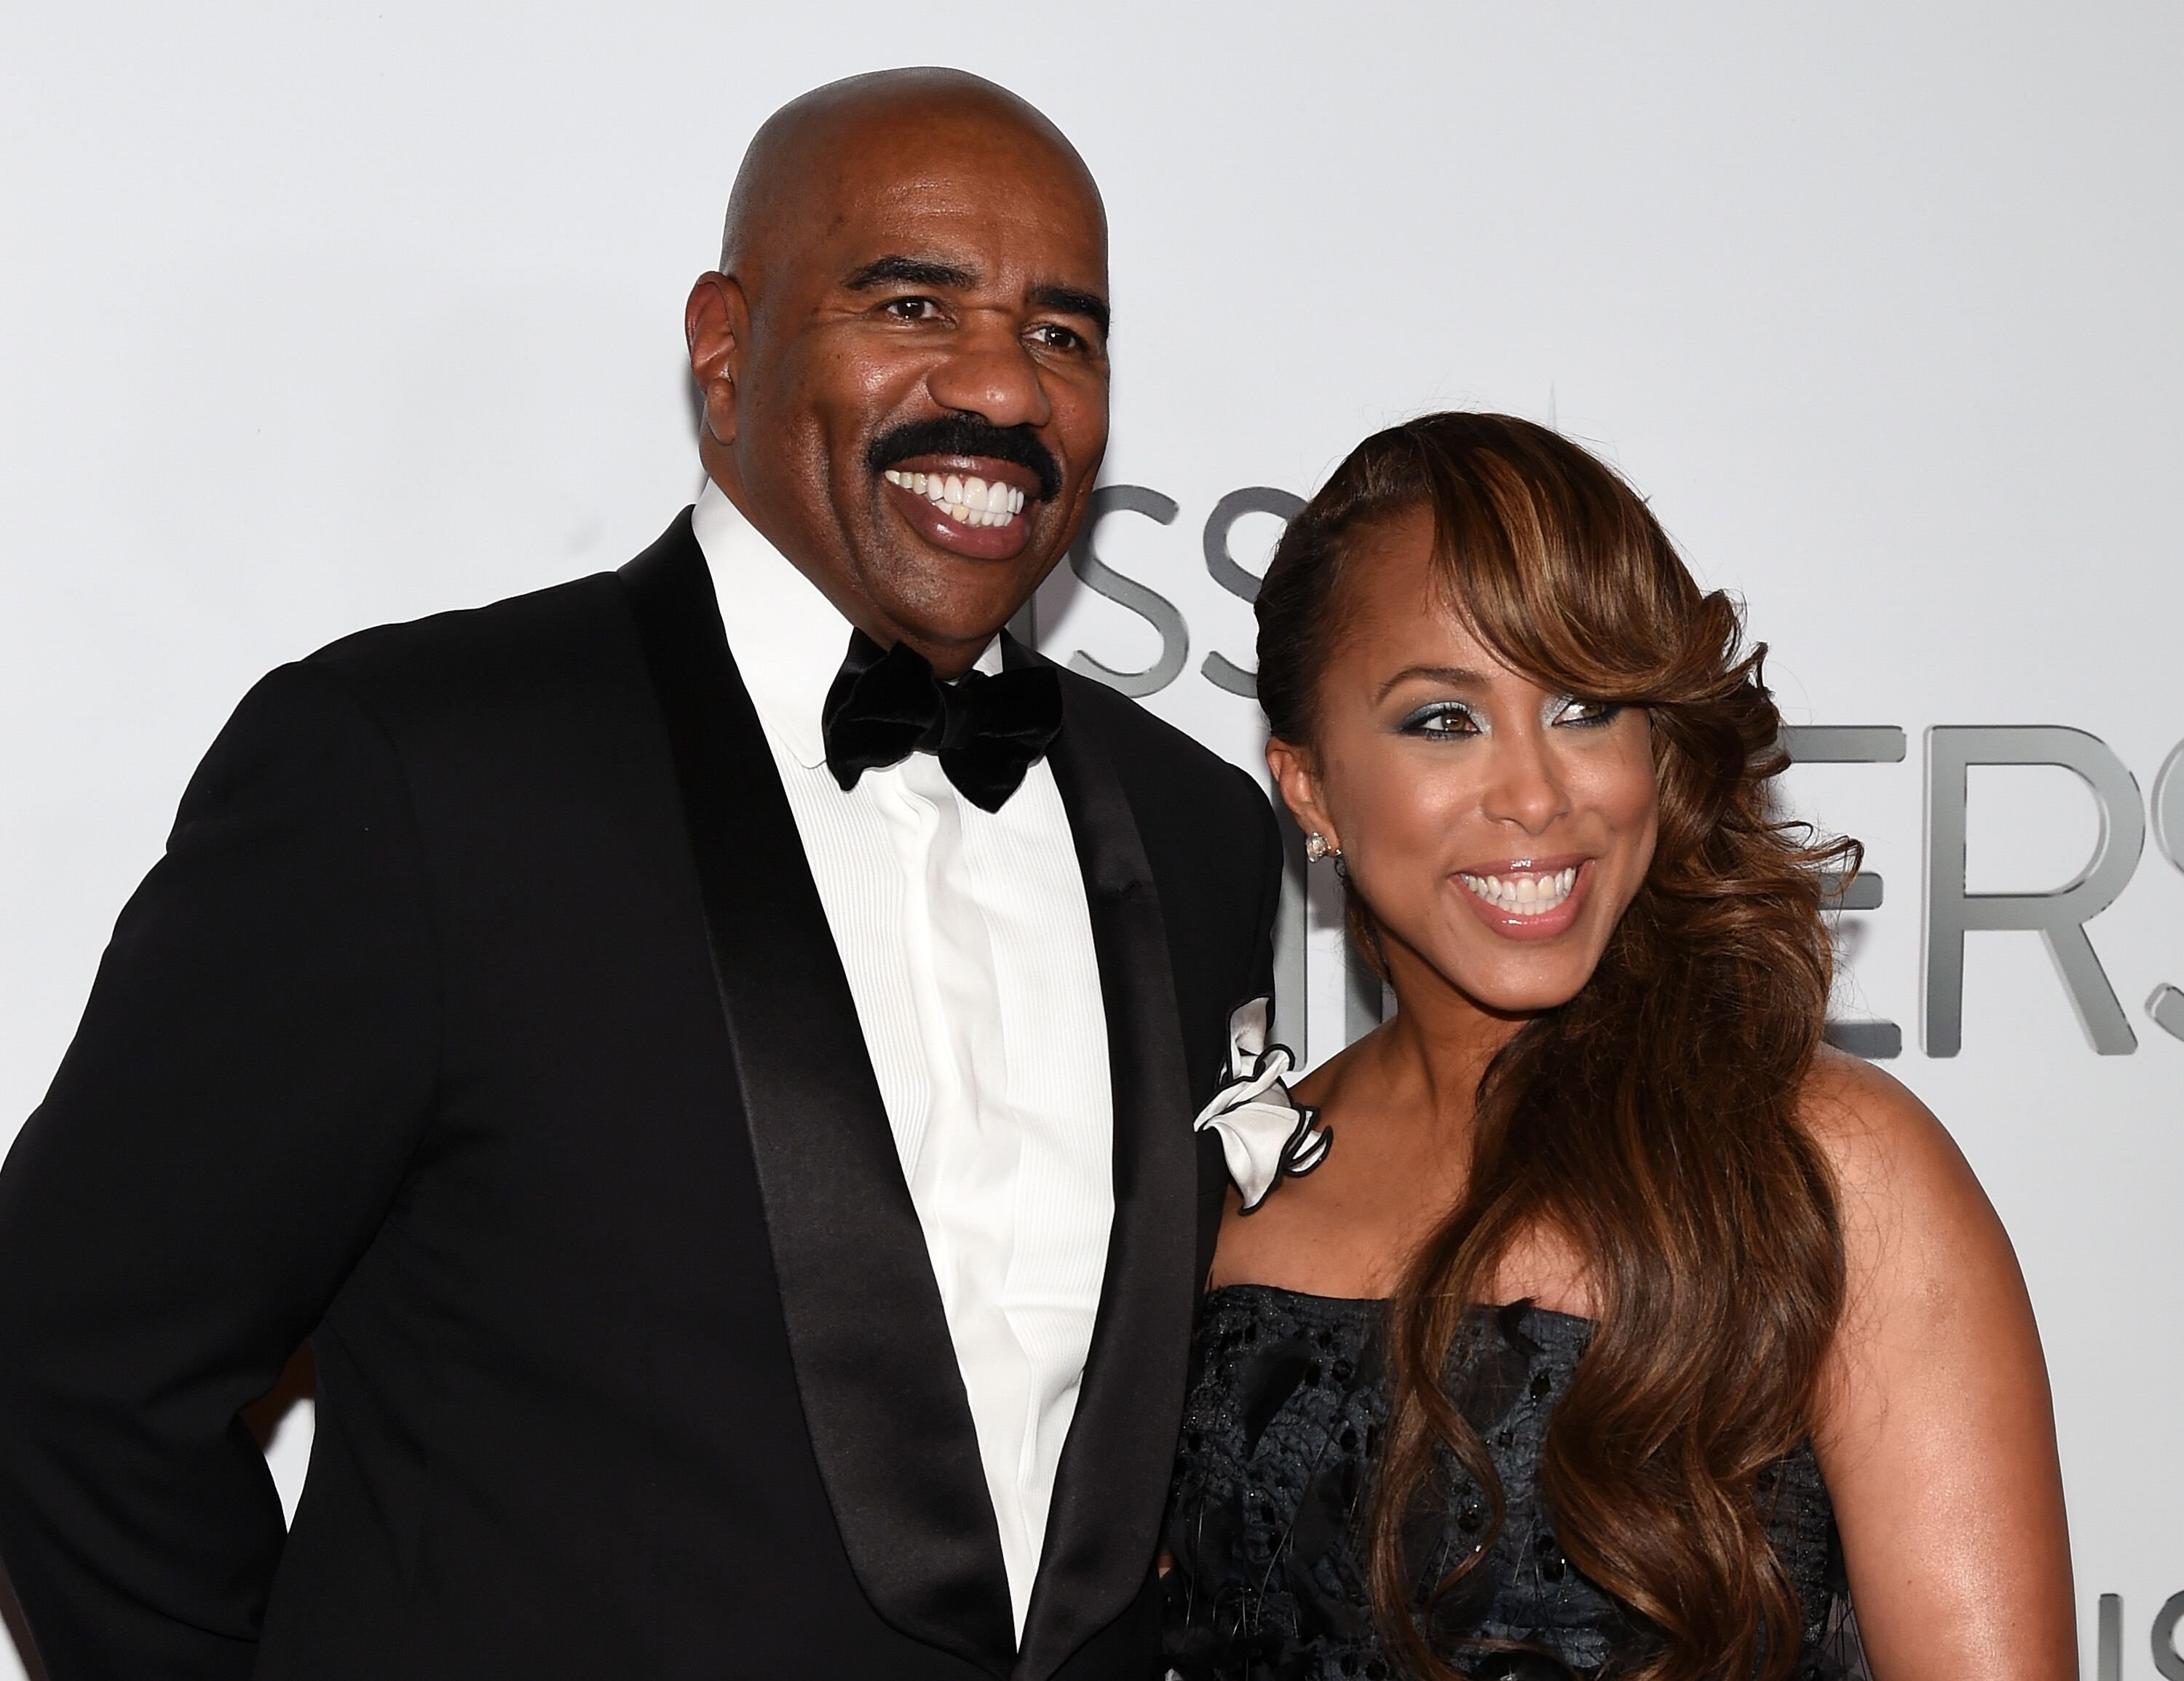 Steve Harvey and his wife Marjorie Harvey attend the 2015 Miss Universe Pageant at Planet Hollywood Resort & Casino on December 20, 2015 in Las Vegas, Nevada | Photo: Getty Images